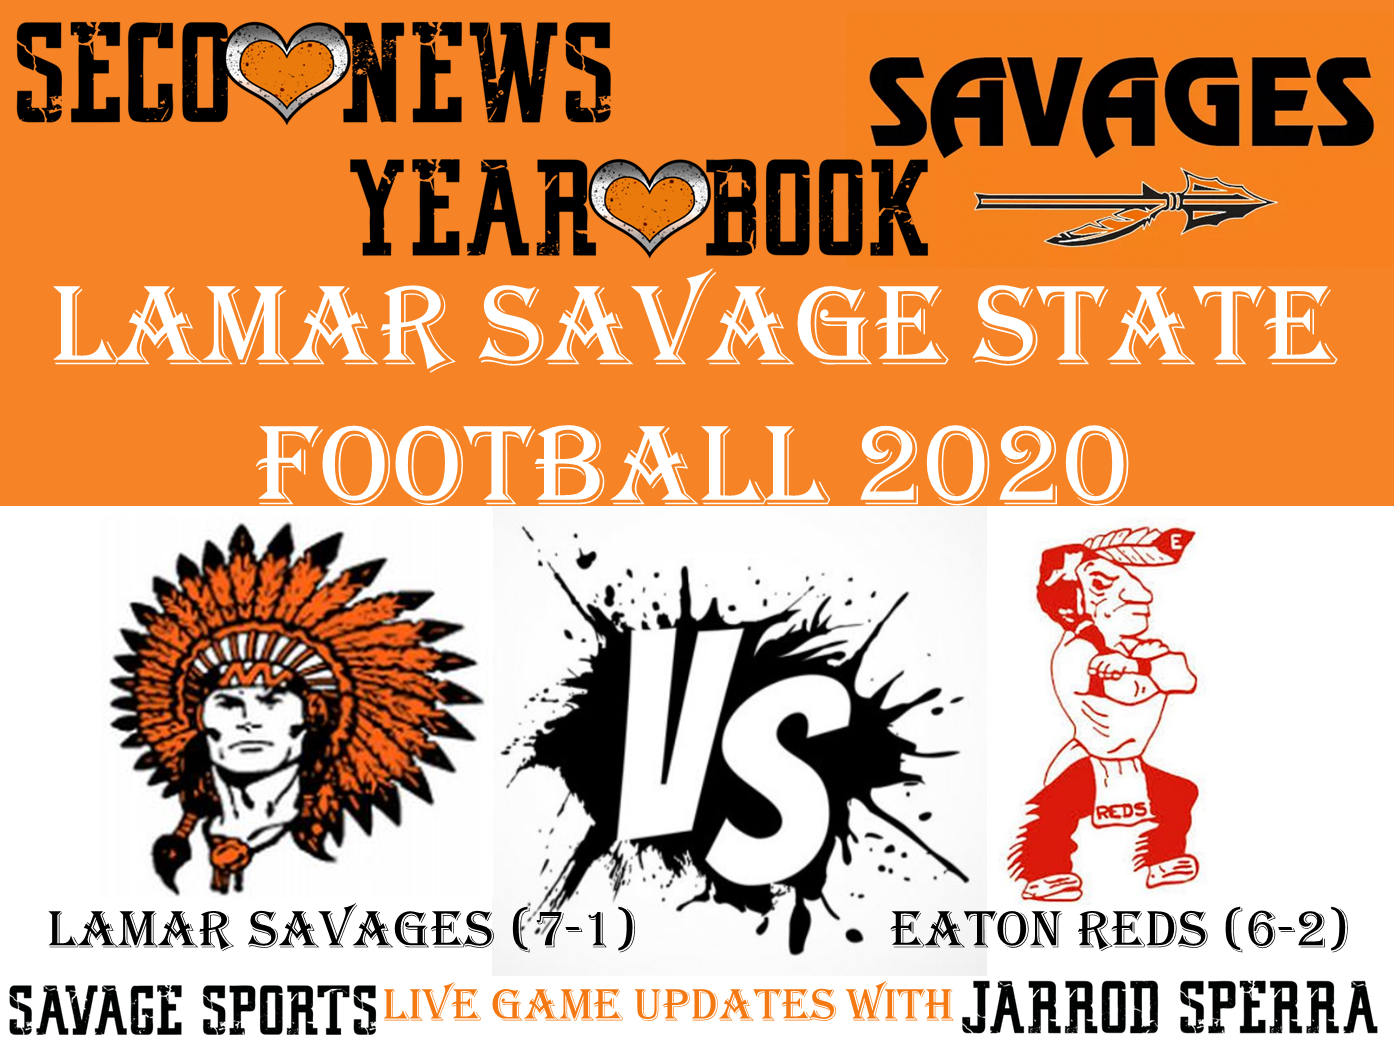 Lamar Savages State Football Yearbook LIVE cover seconews.com